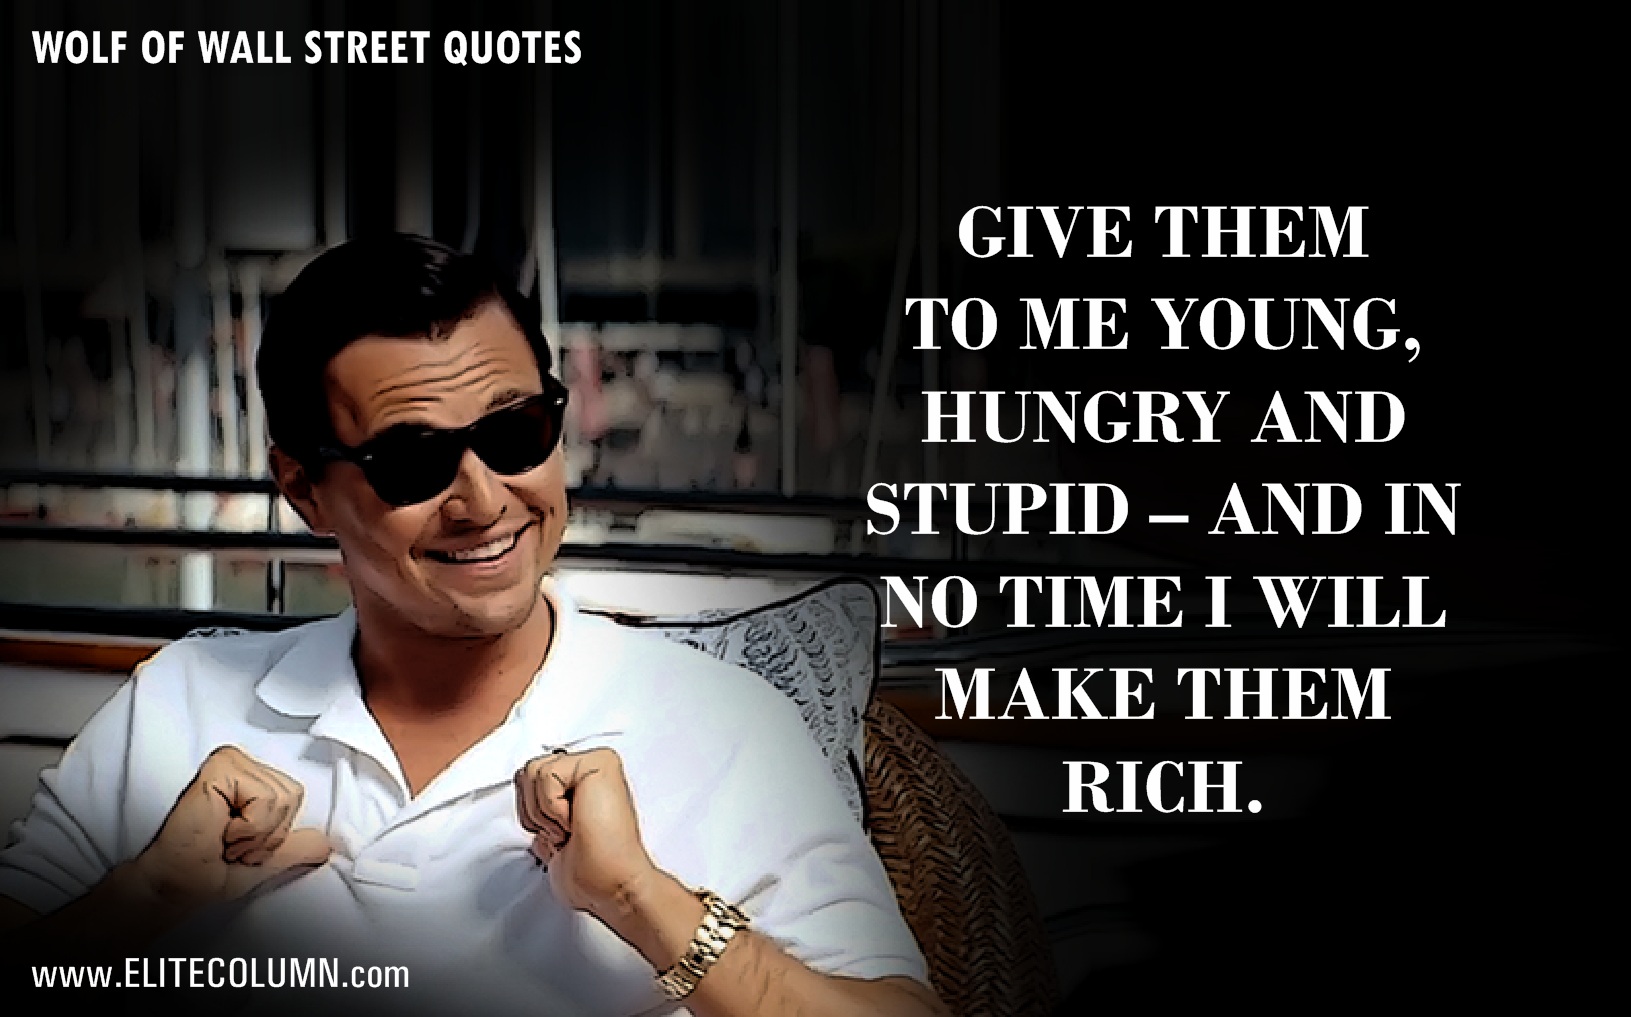 The Wolf Of Wall Street Quotes (9)